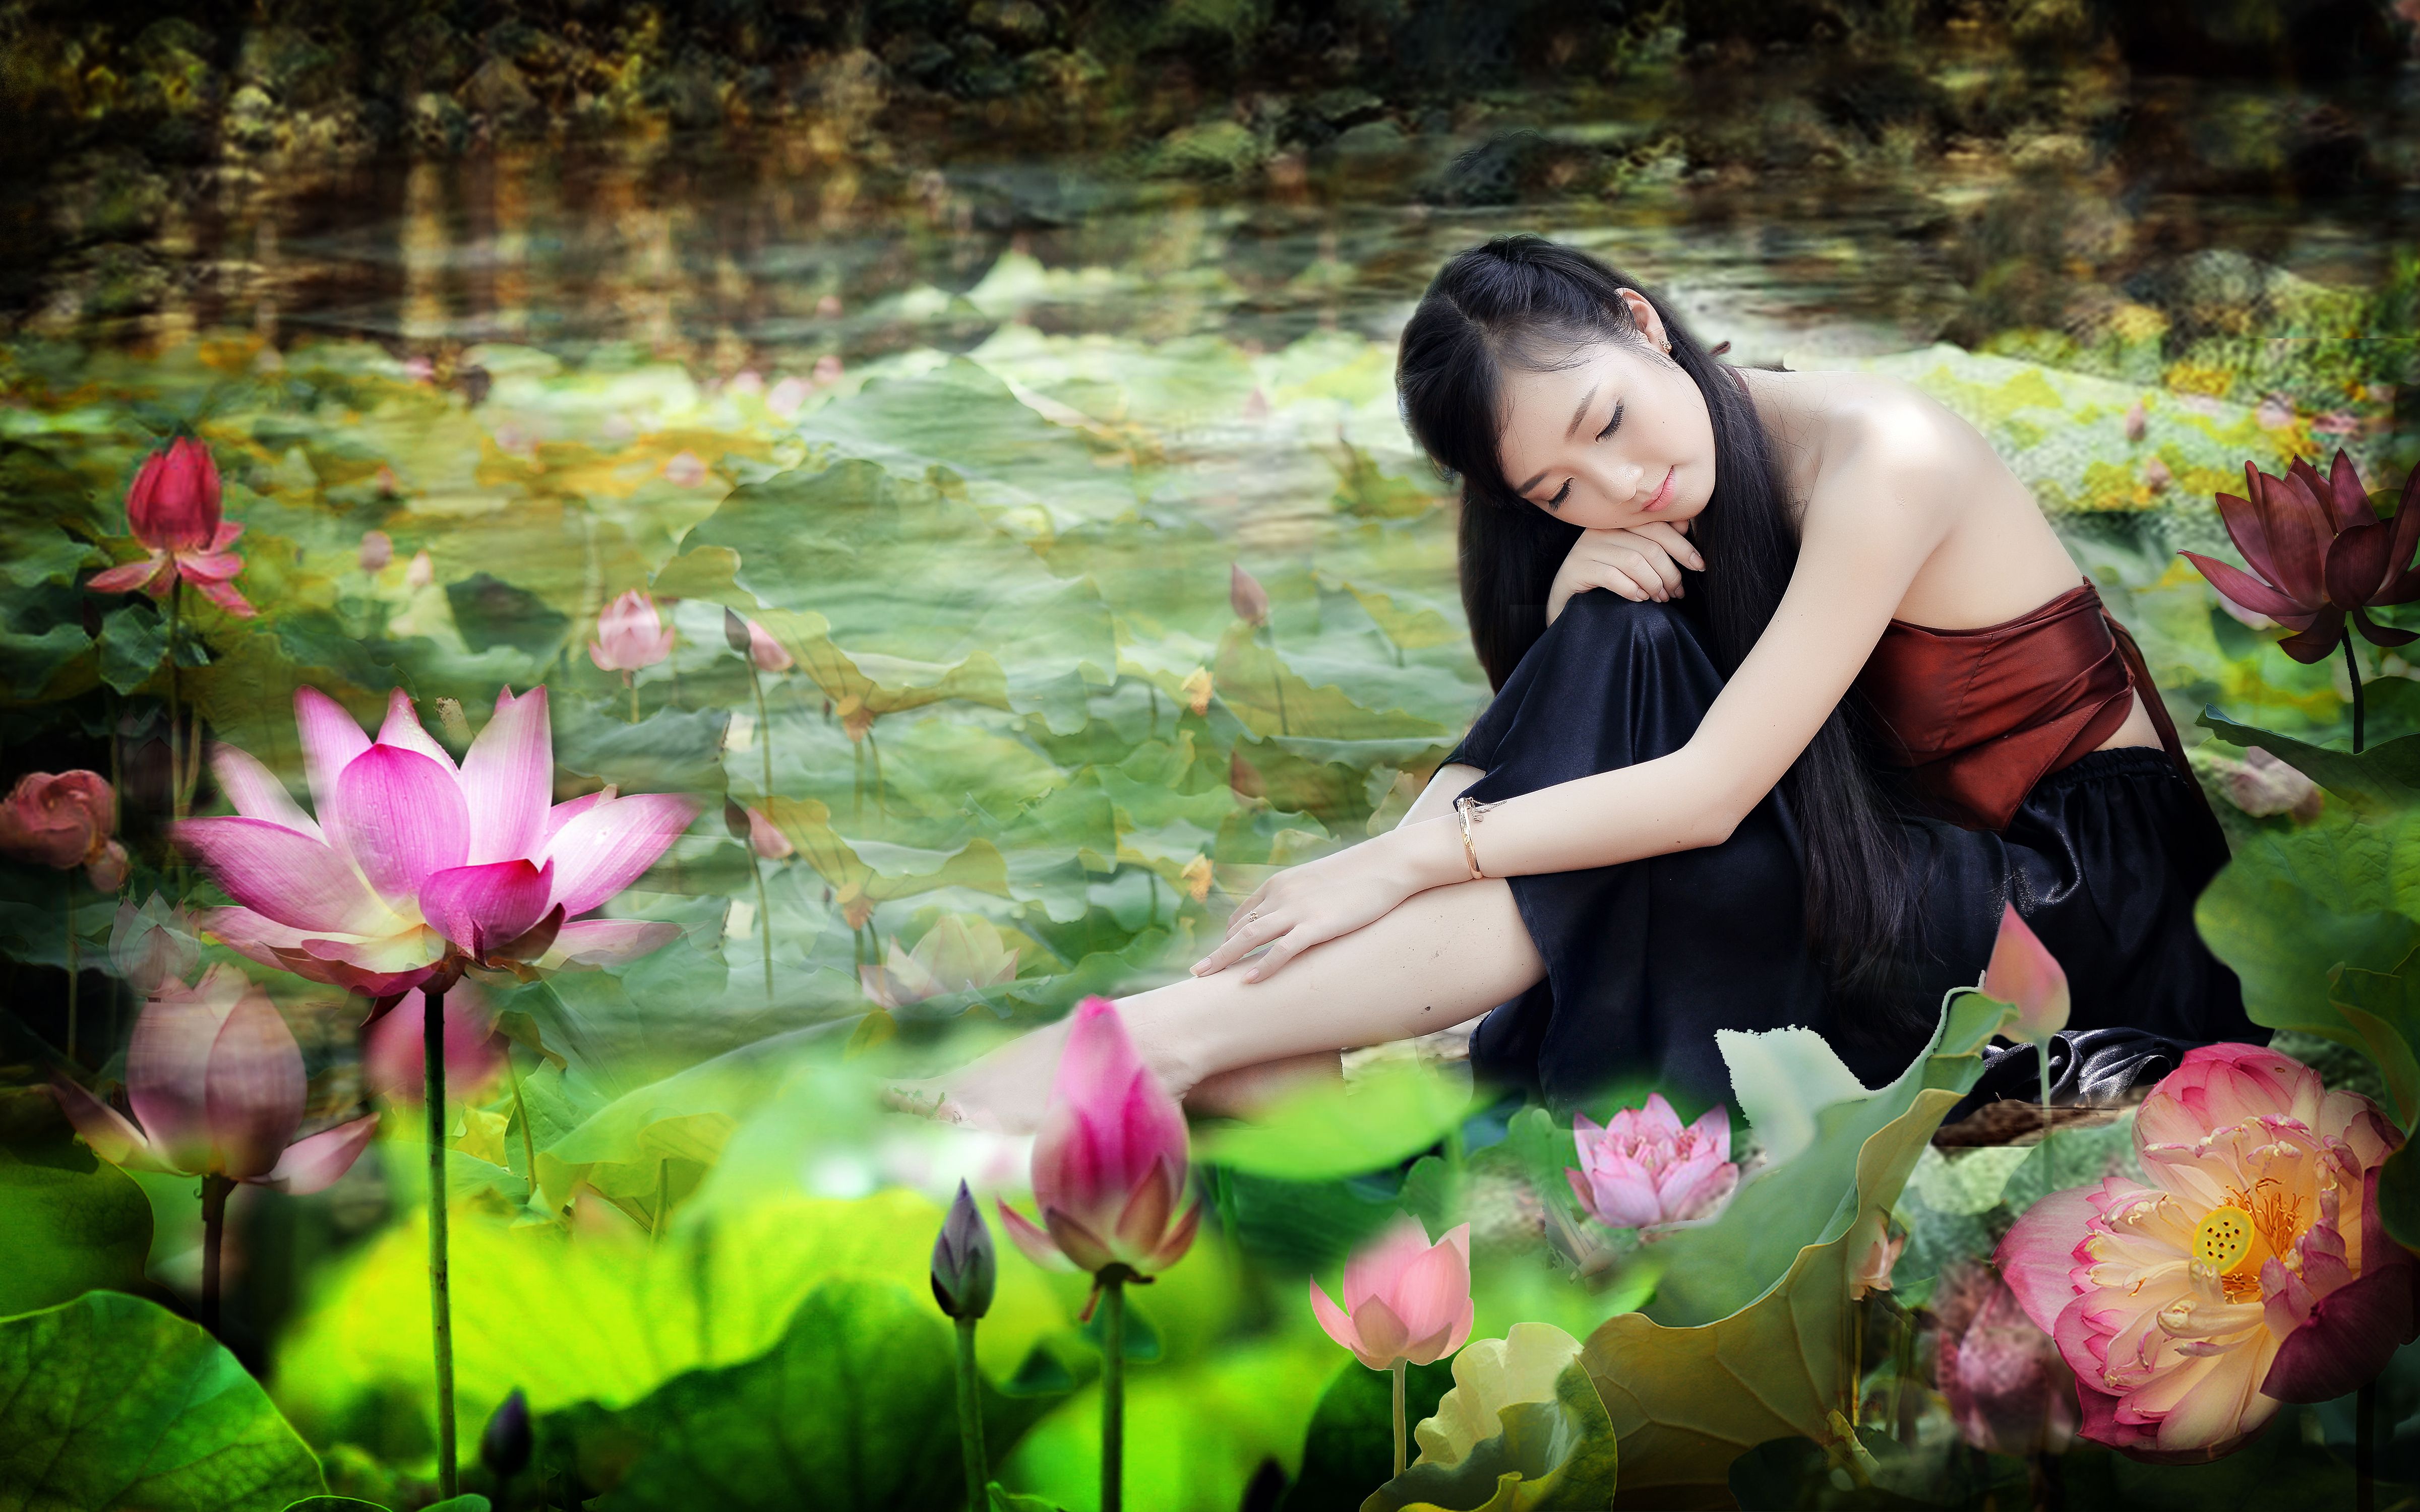 Lotus Flower With Girl